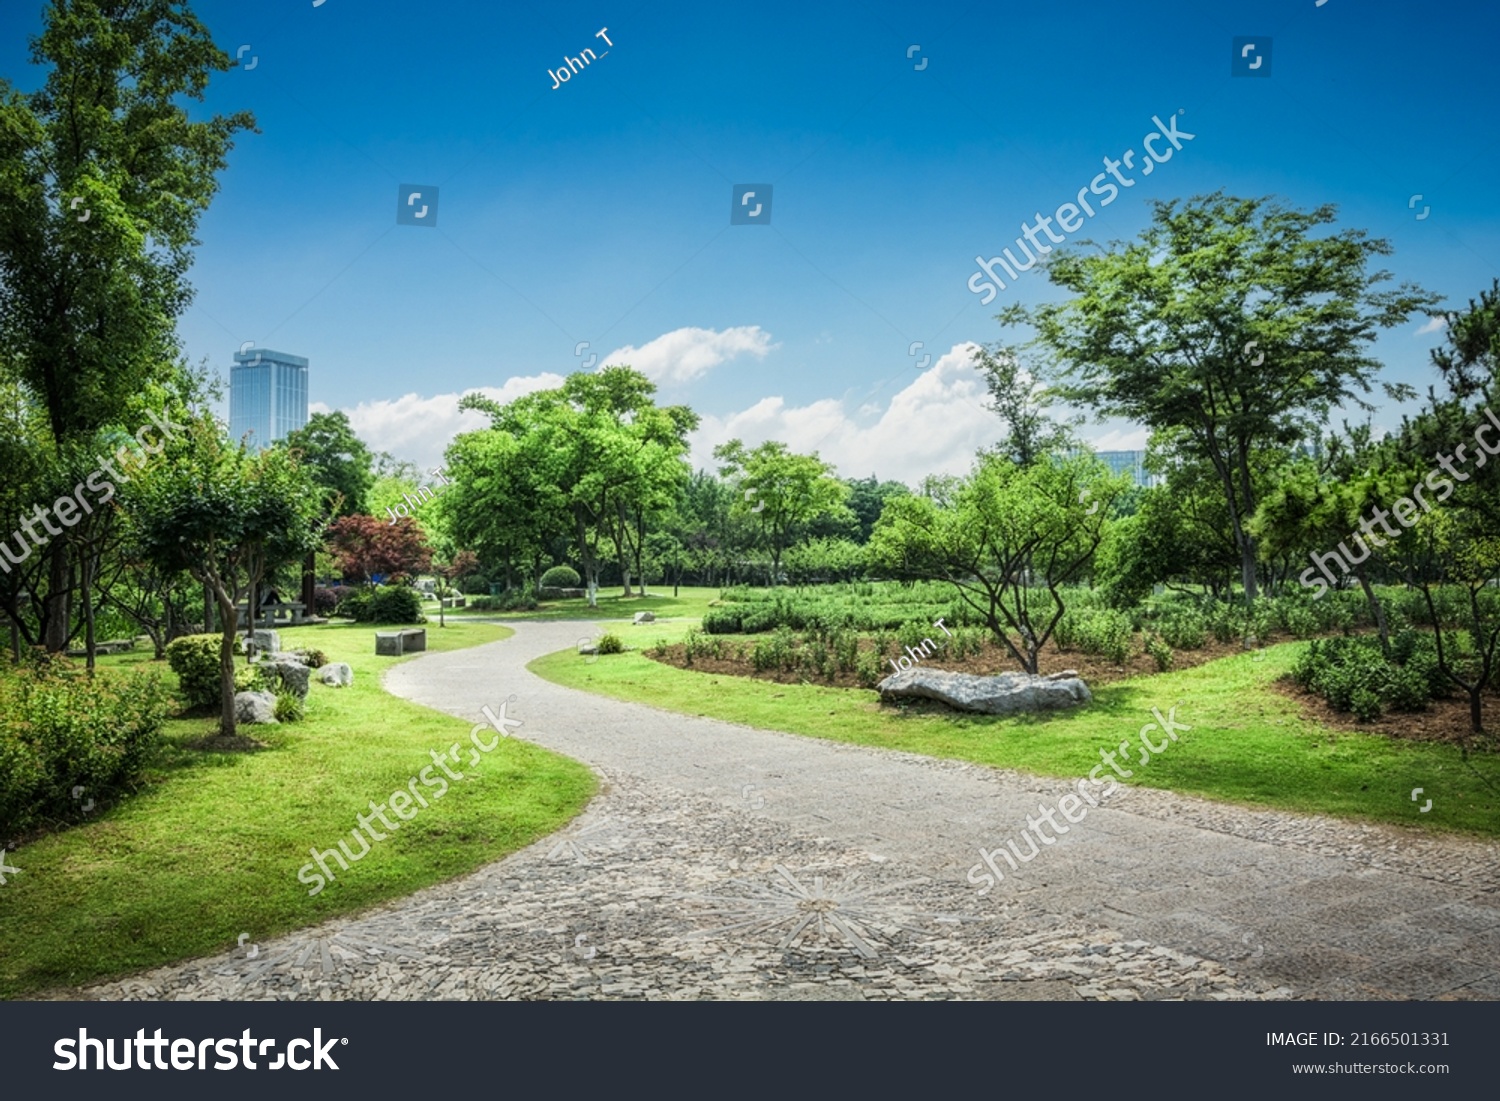 Nice green forest landscape in the city #2166501331